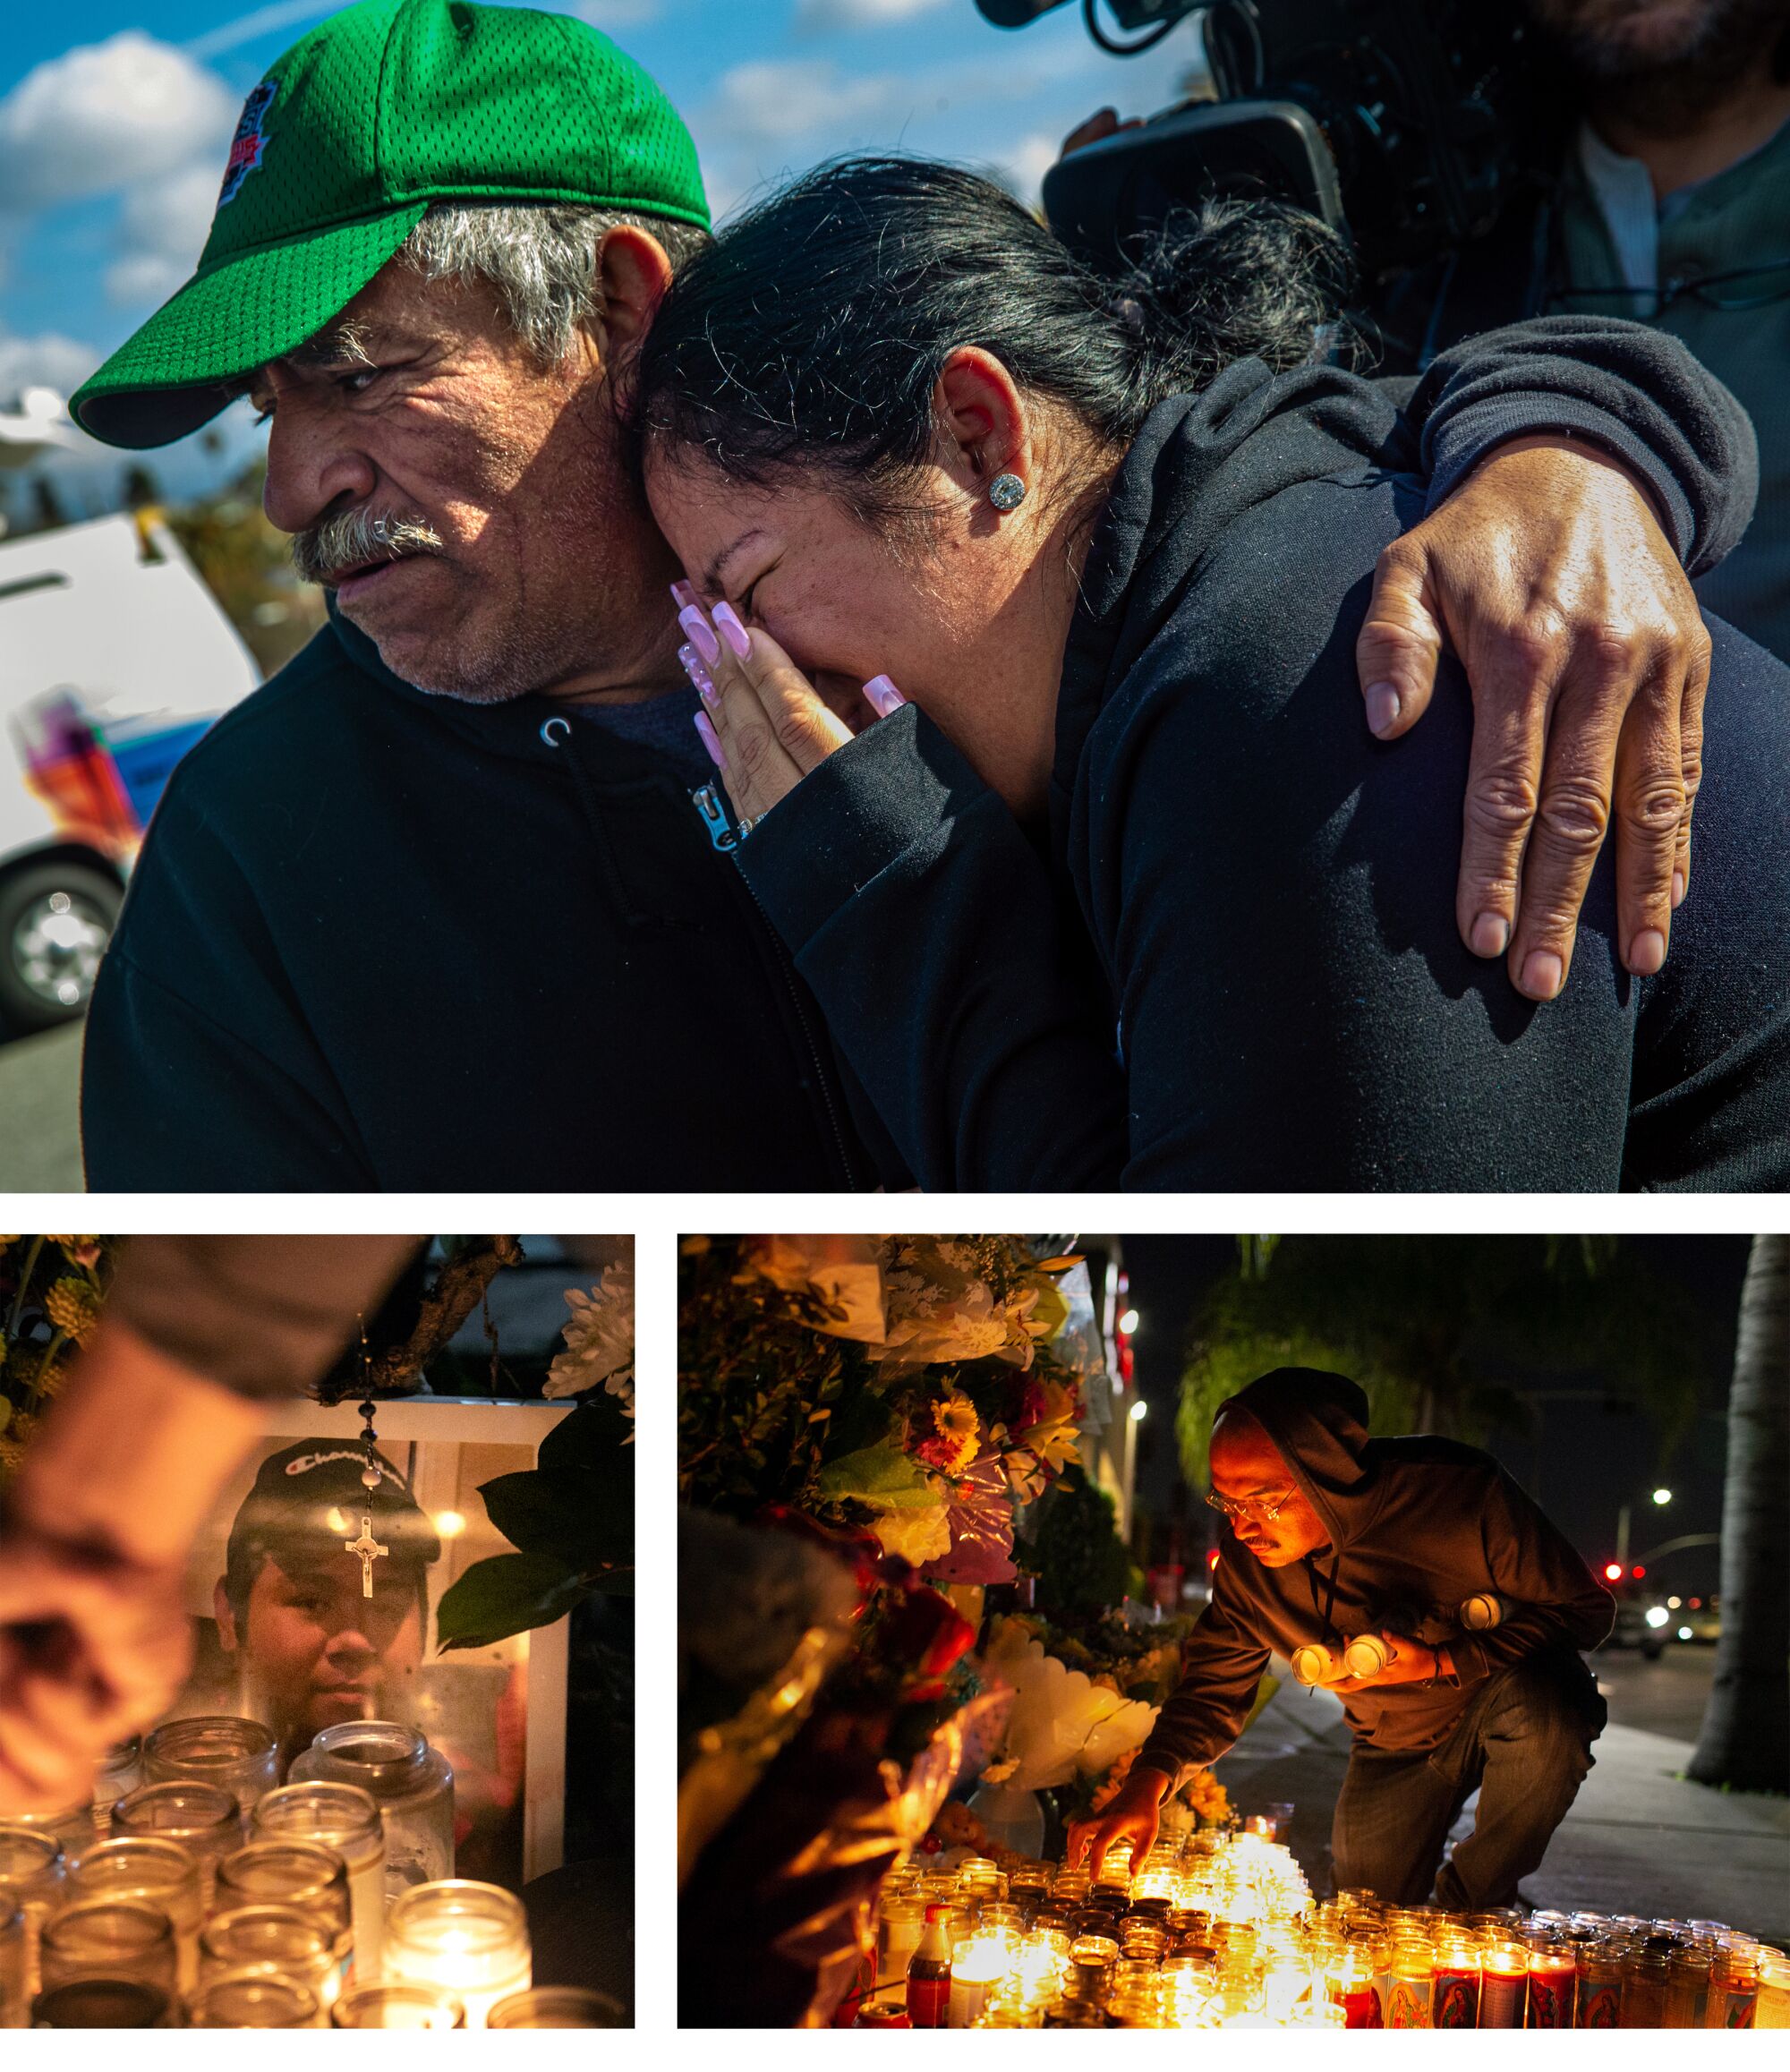 A triptych: top, a man hugs a crying woman; bottom left, a teen sits at a vigil, and right, man lights a candle.